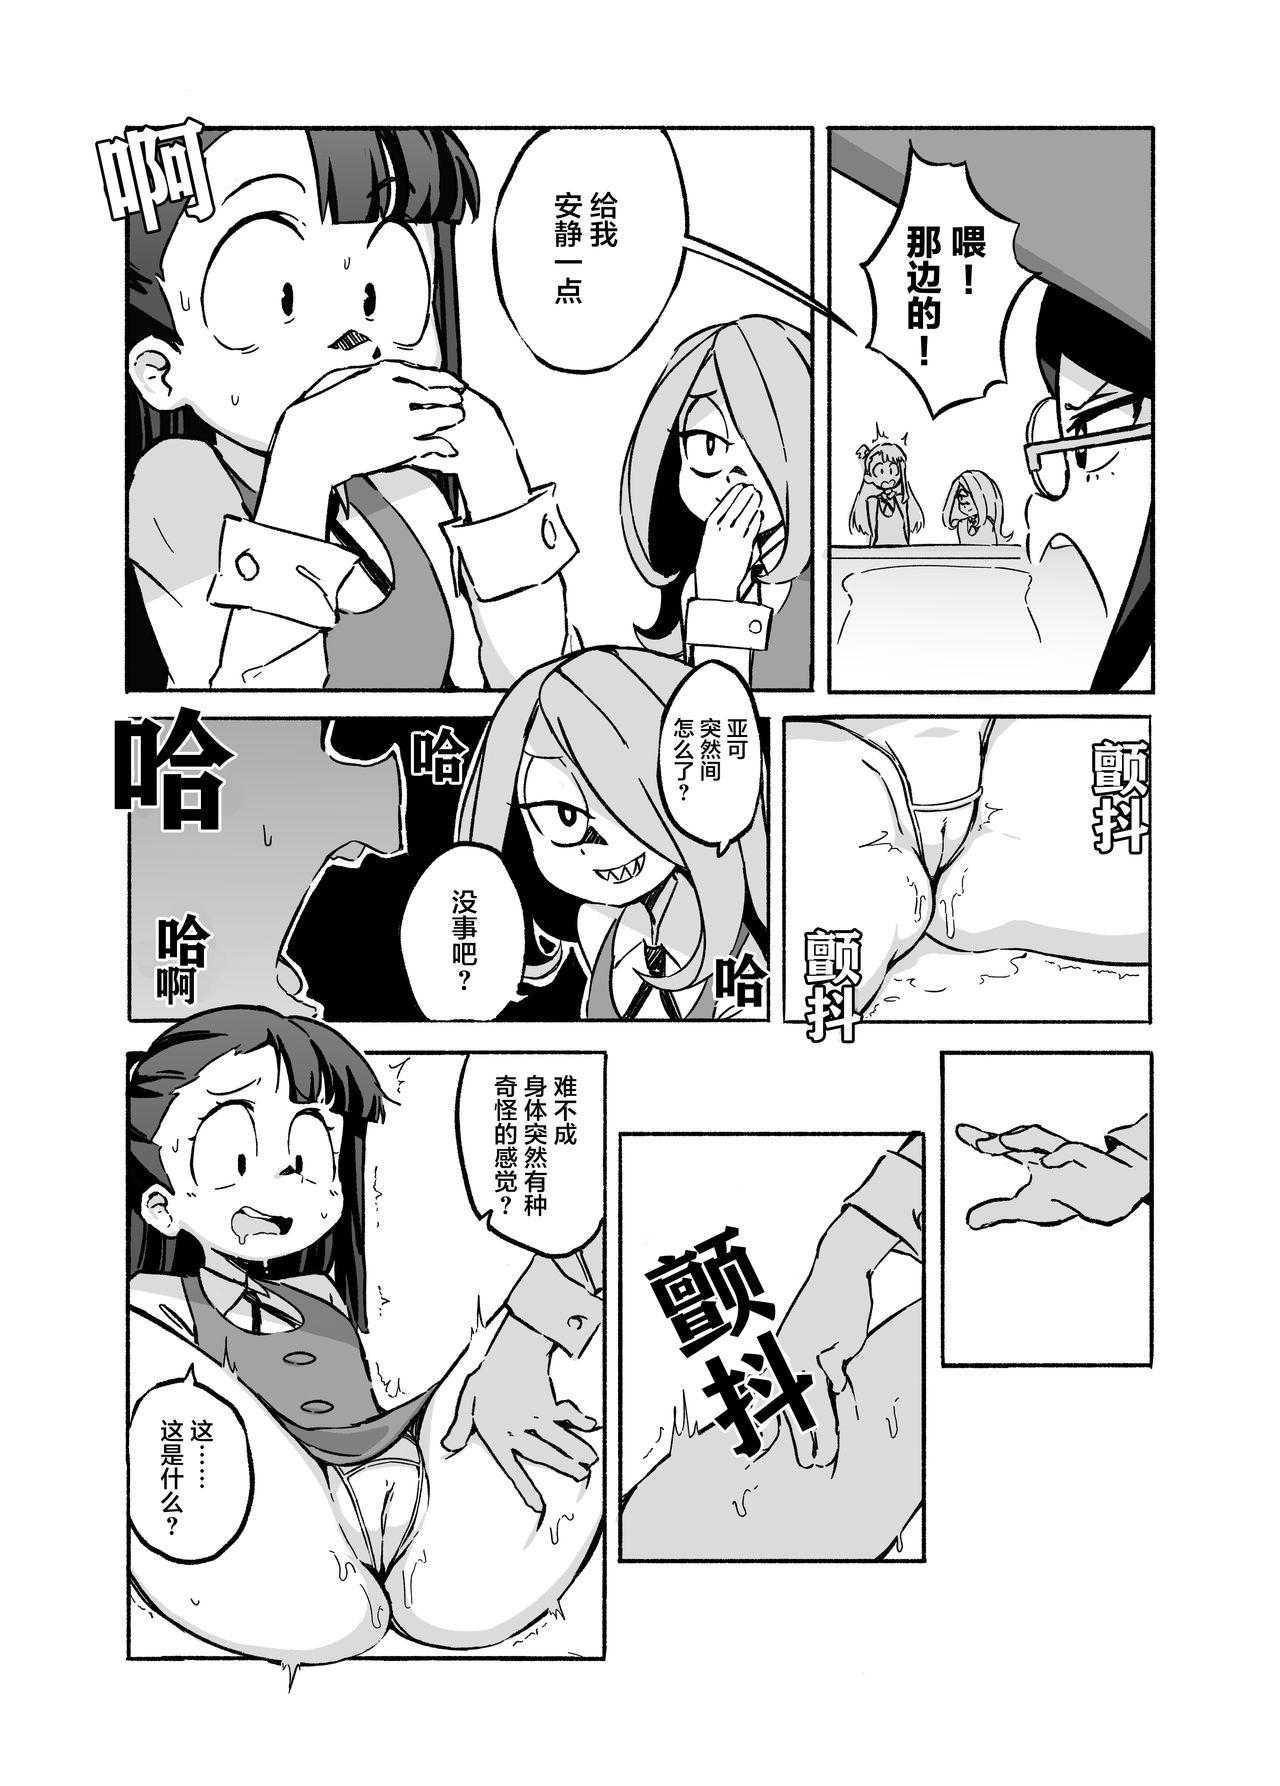 Madura Mushroom Fever - Little witch academia Blond - Page 9